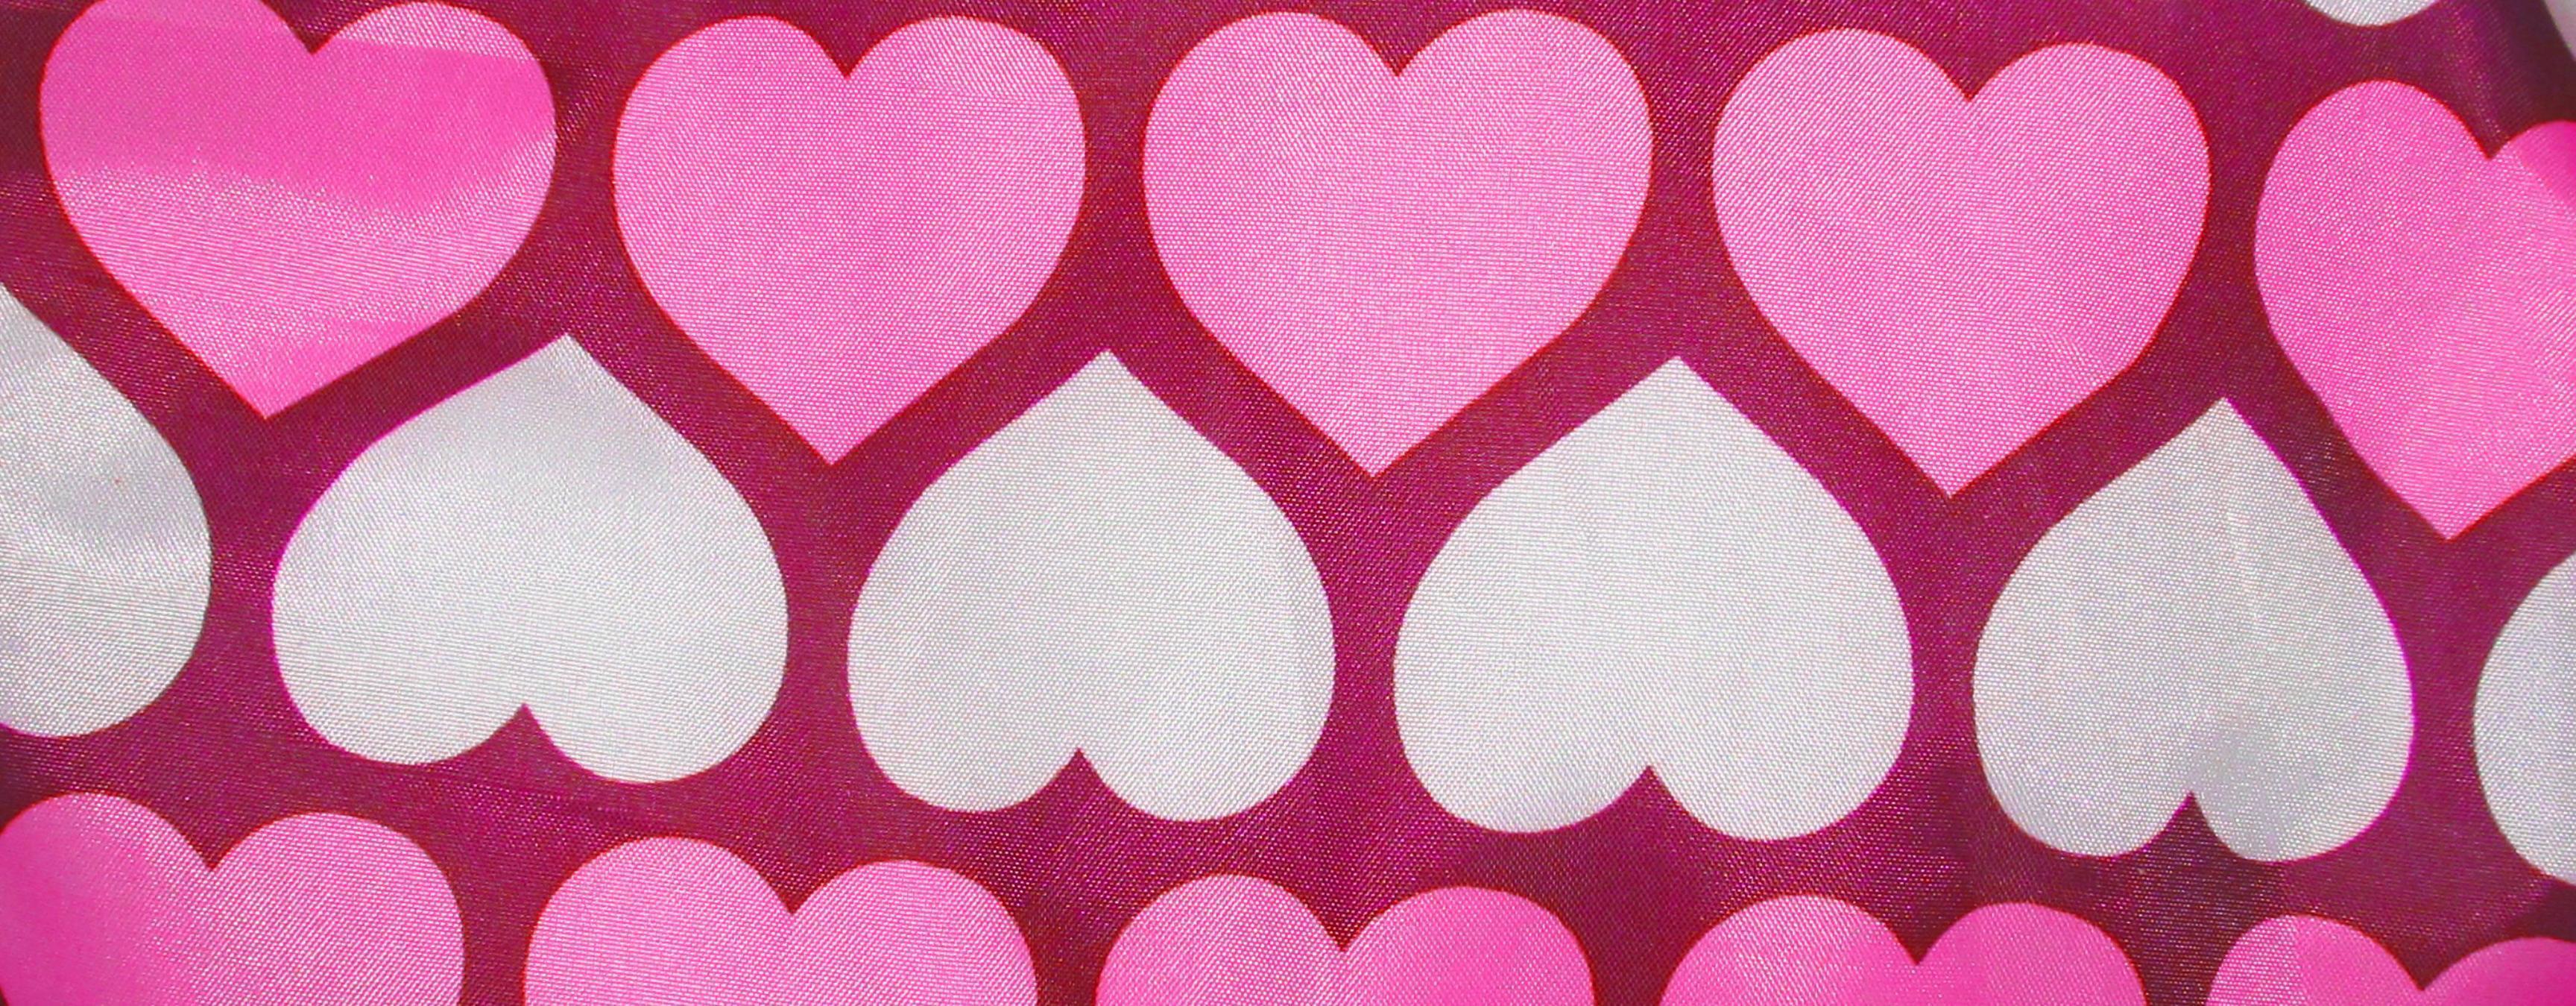 Wallpaper For > Pink Hearts Wallpaper Background